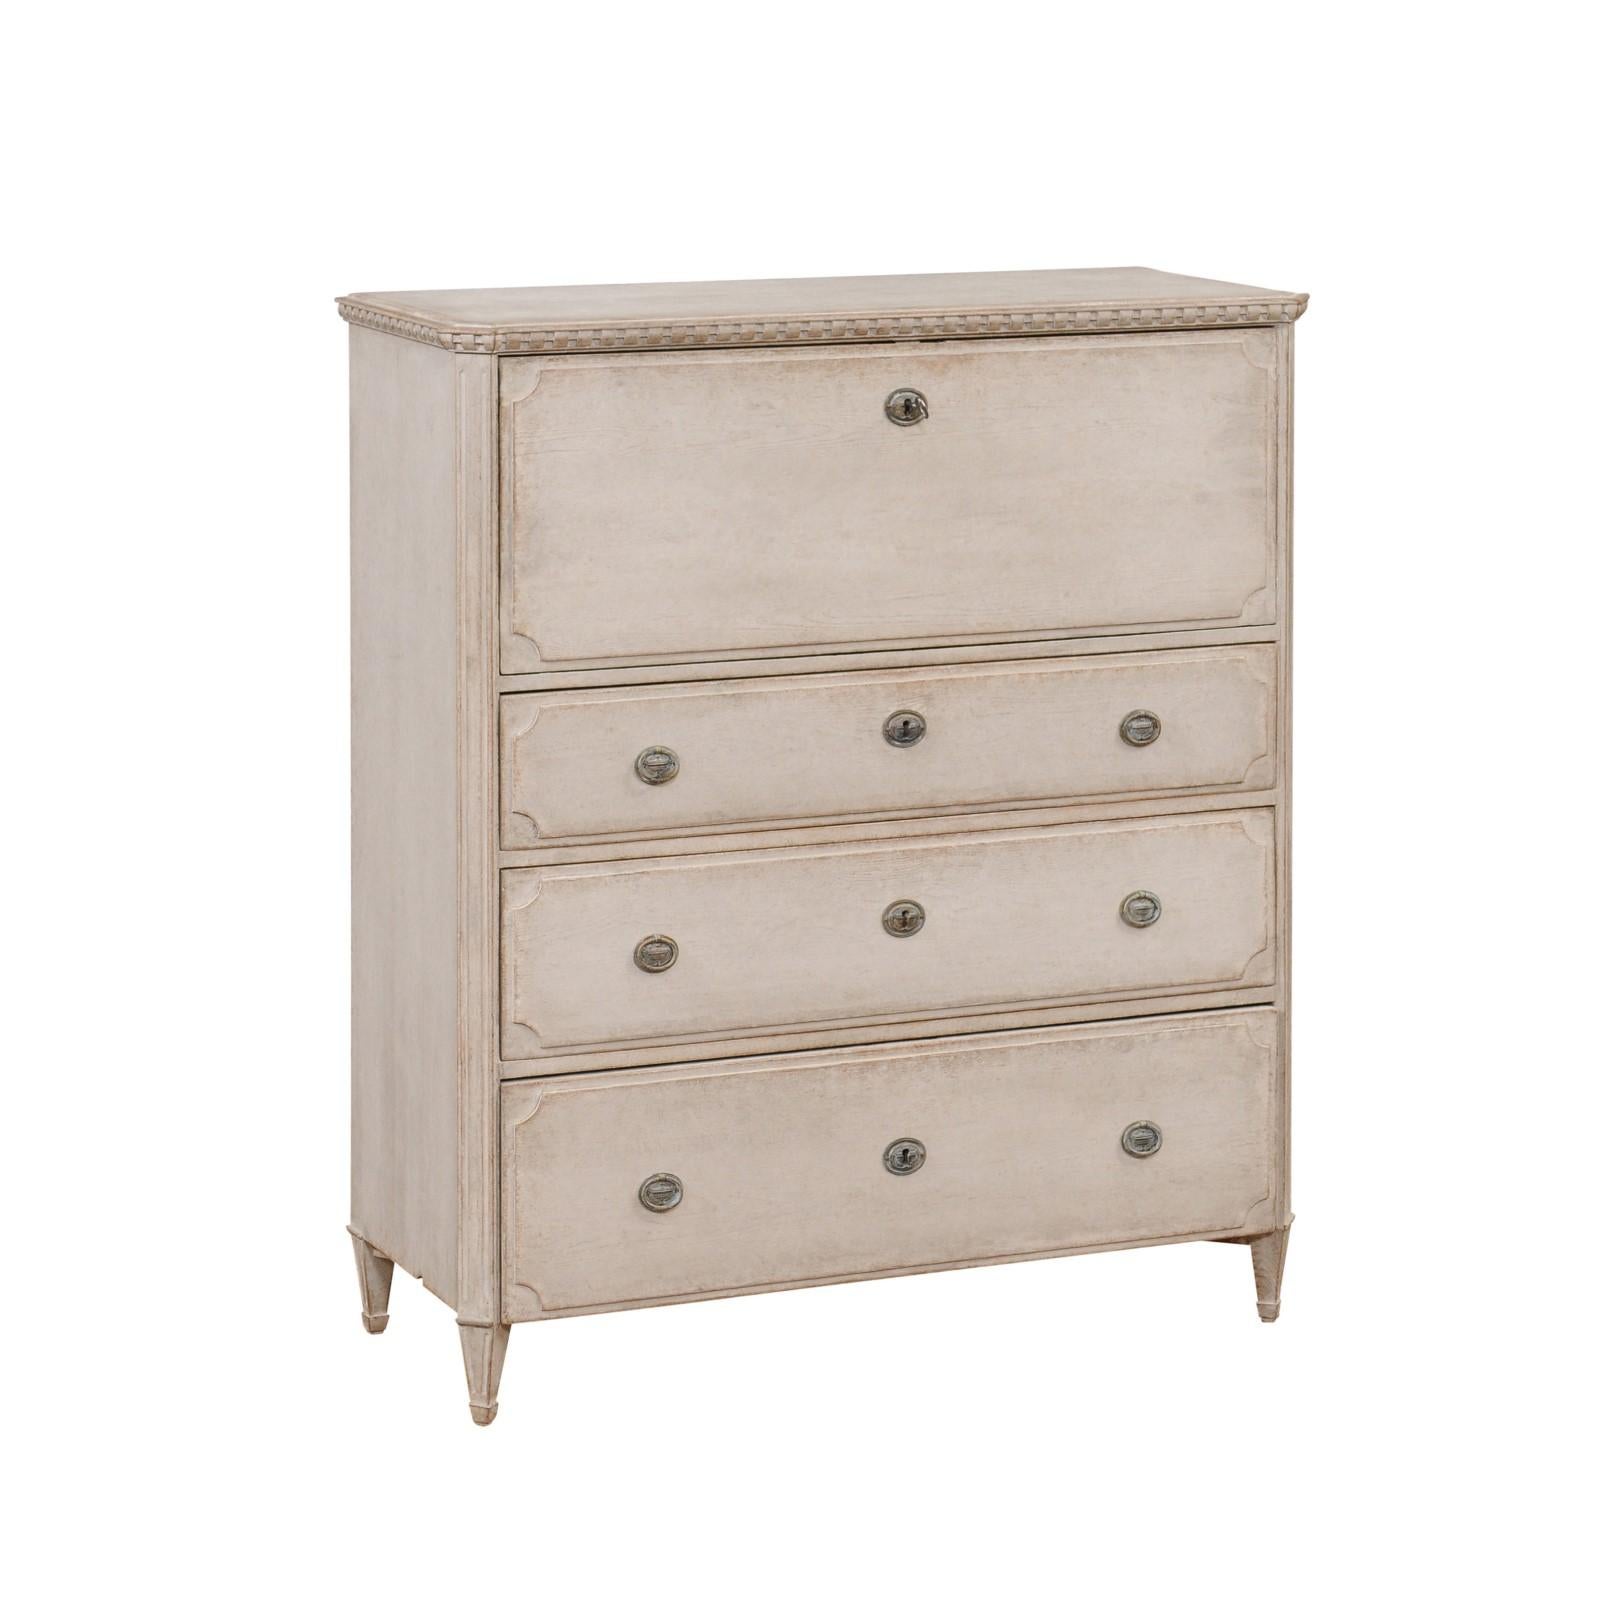 A Swedish Gustavian style drop front secretary from circa 1840 with gray painted finish, writing area and three graduated drawers. This Swedish Gustavian style drop-front secretary, crafted around 1840, is a masterpiece of classical elegance. Its